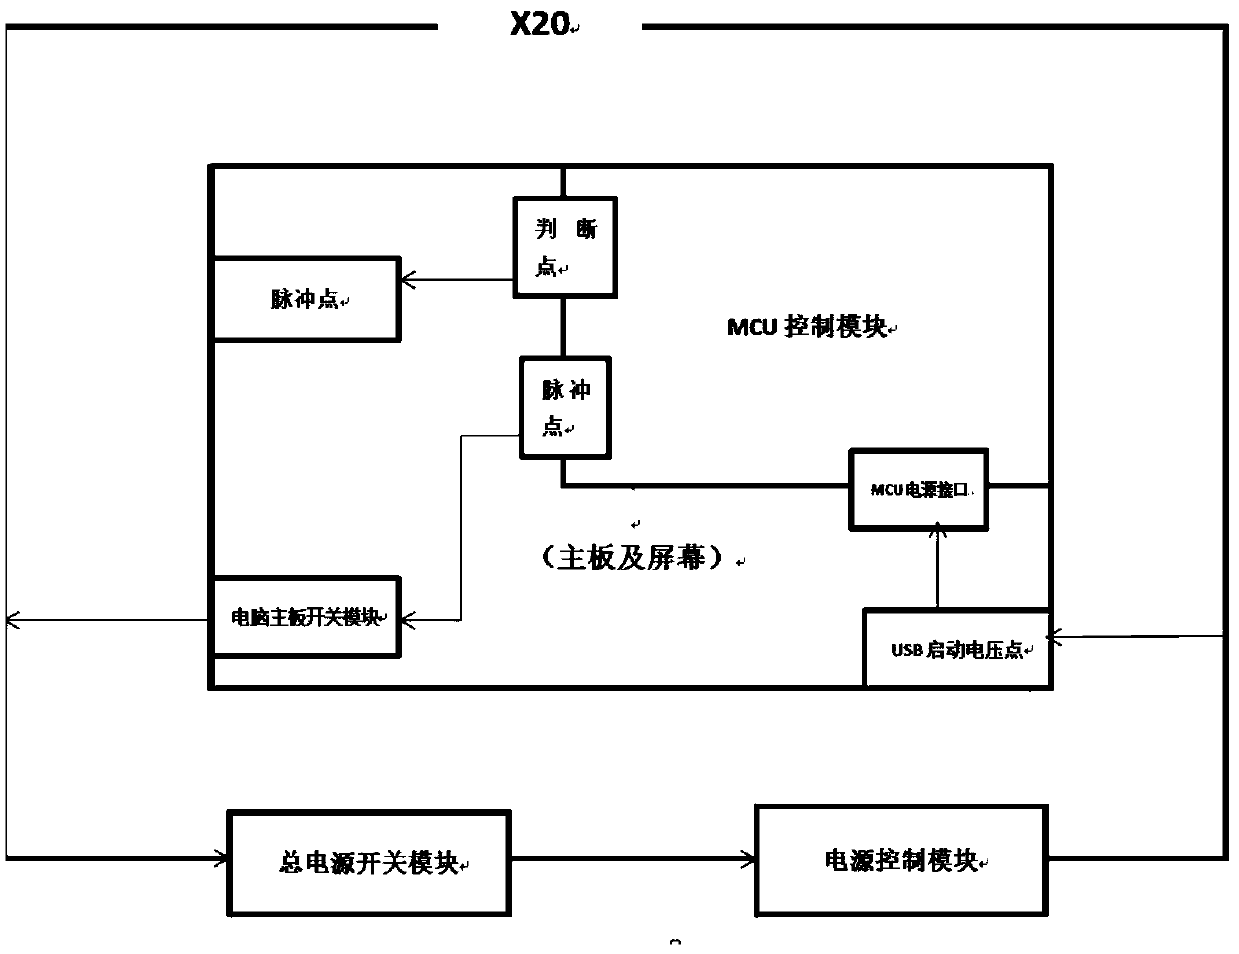 A multi-computer one-key starting system and method based on a universal USB interface